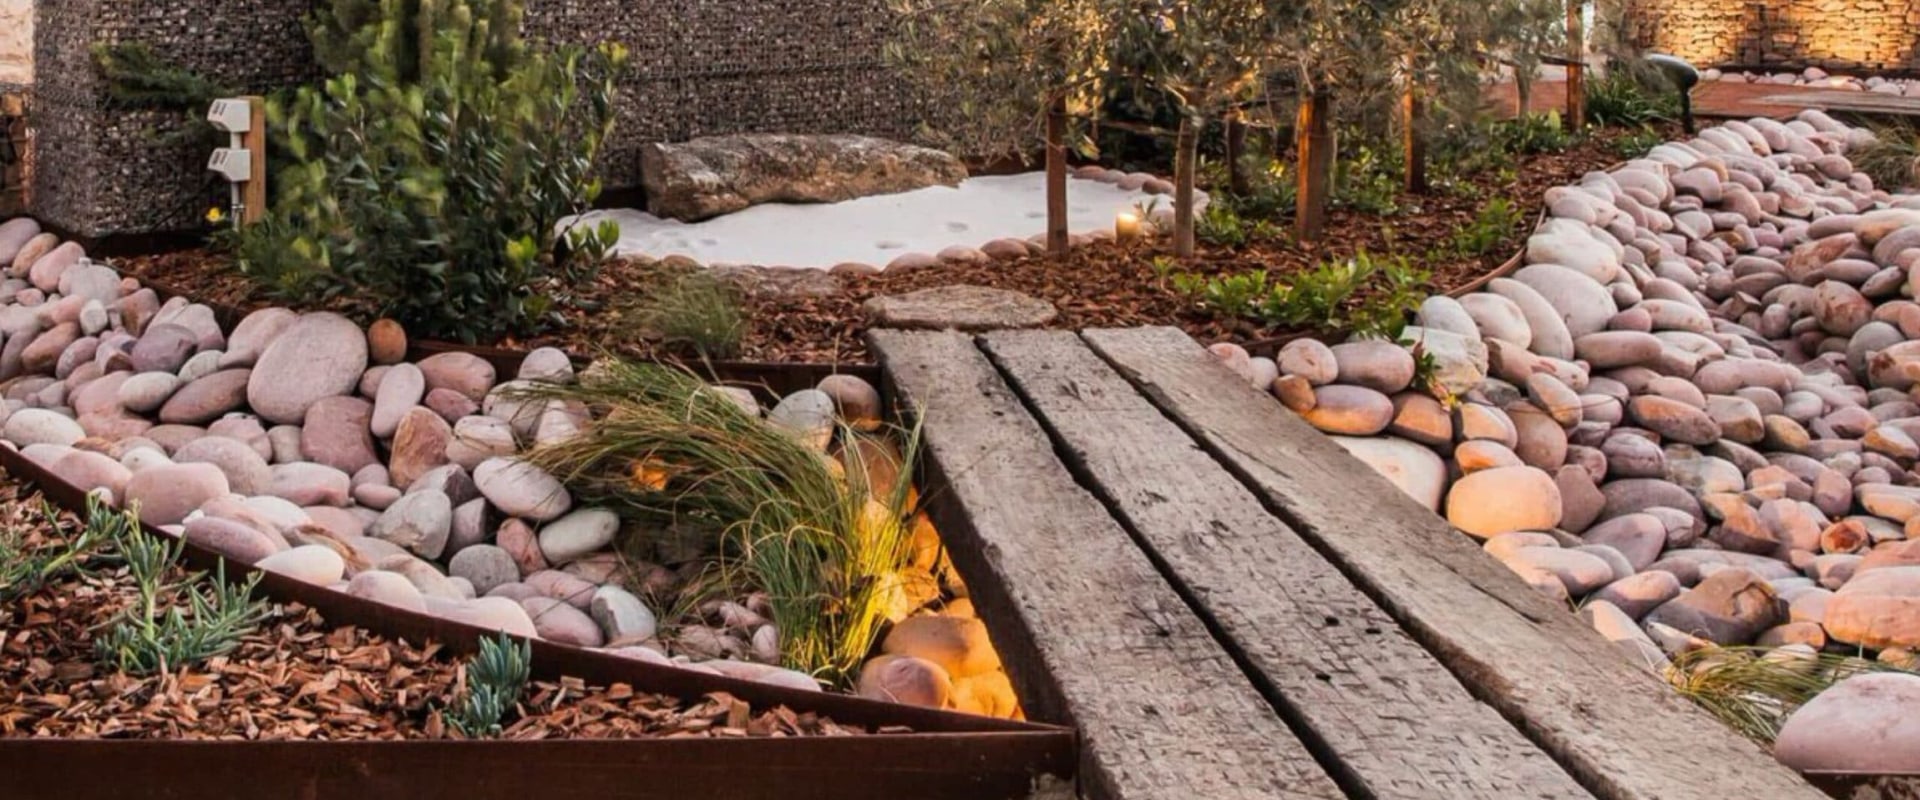 Where to buy hardscape materials?